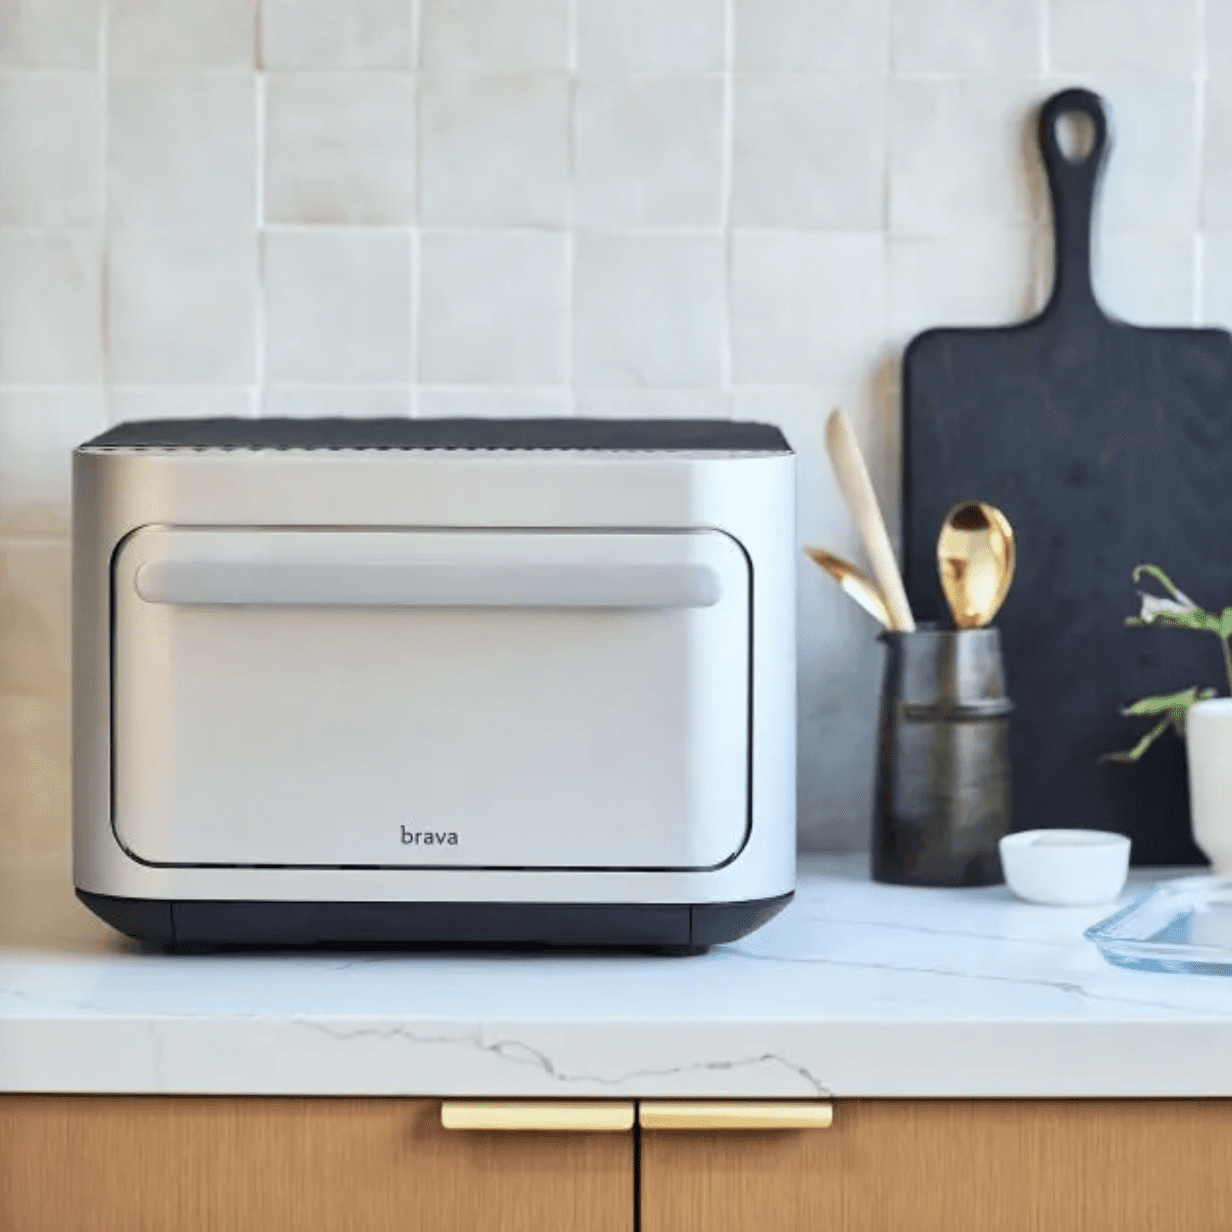 Brava Review: This Smart Oven Still Feels Underdone